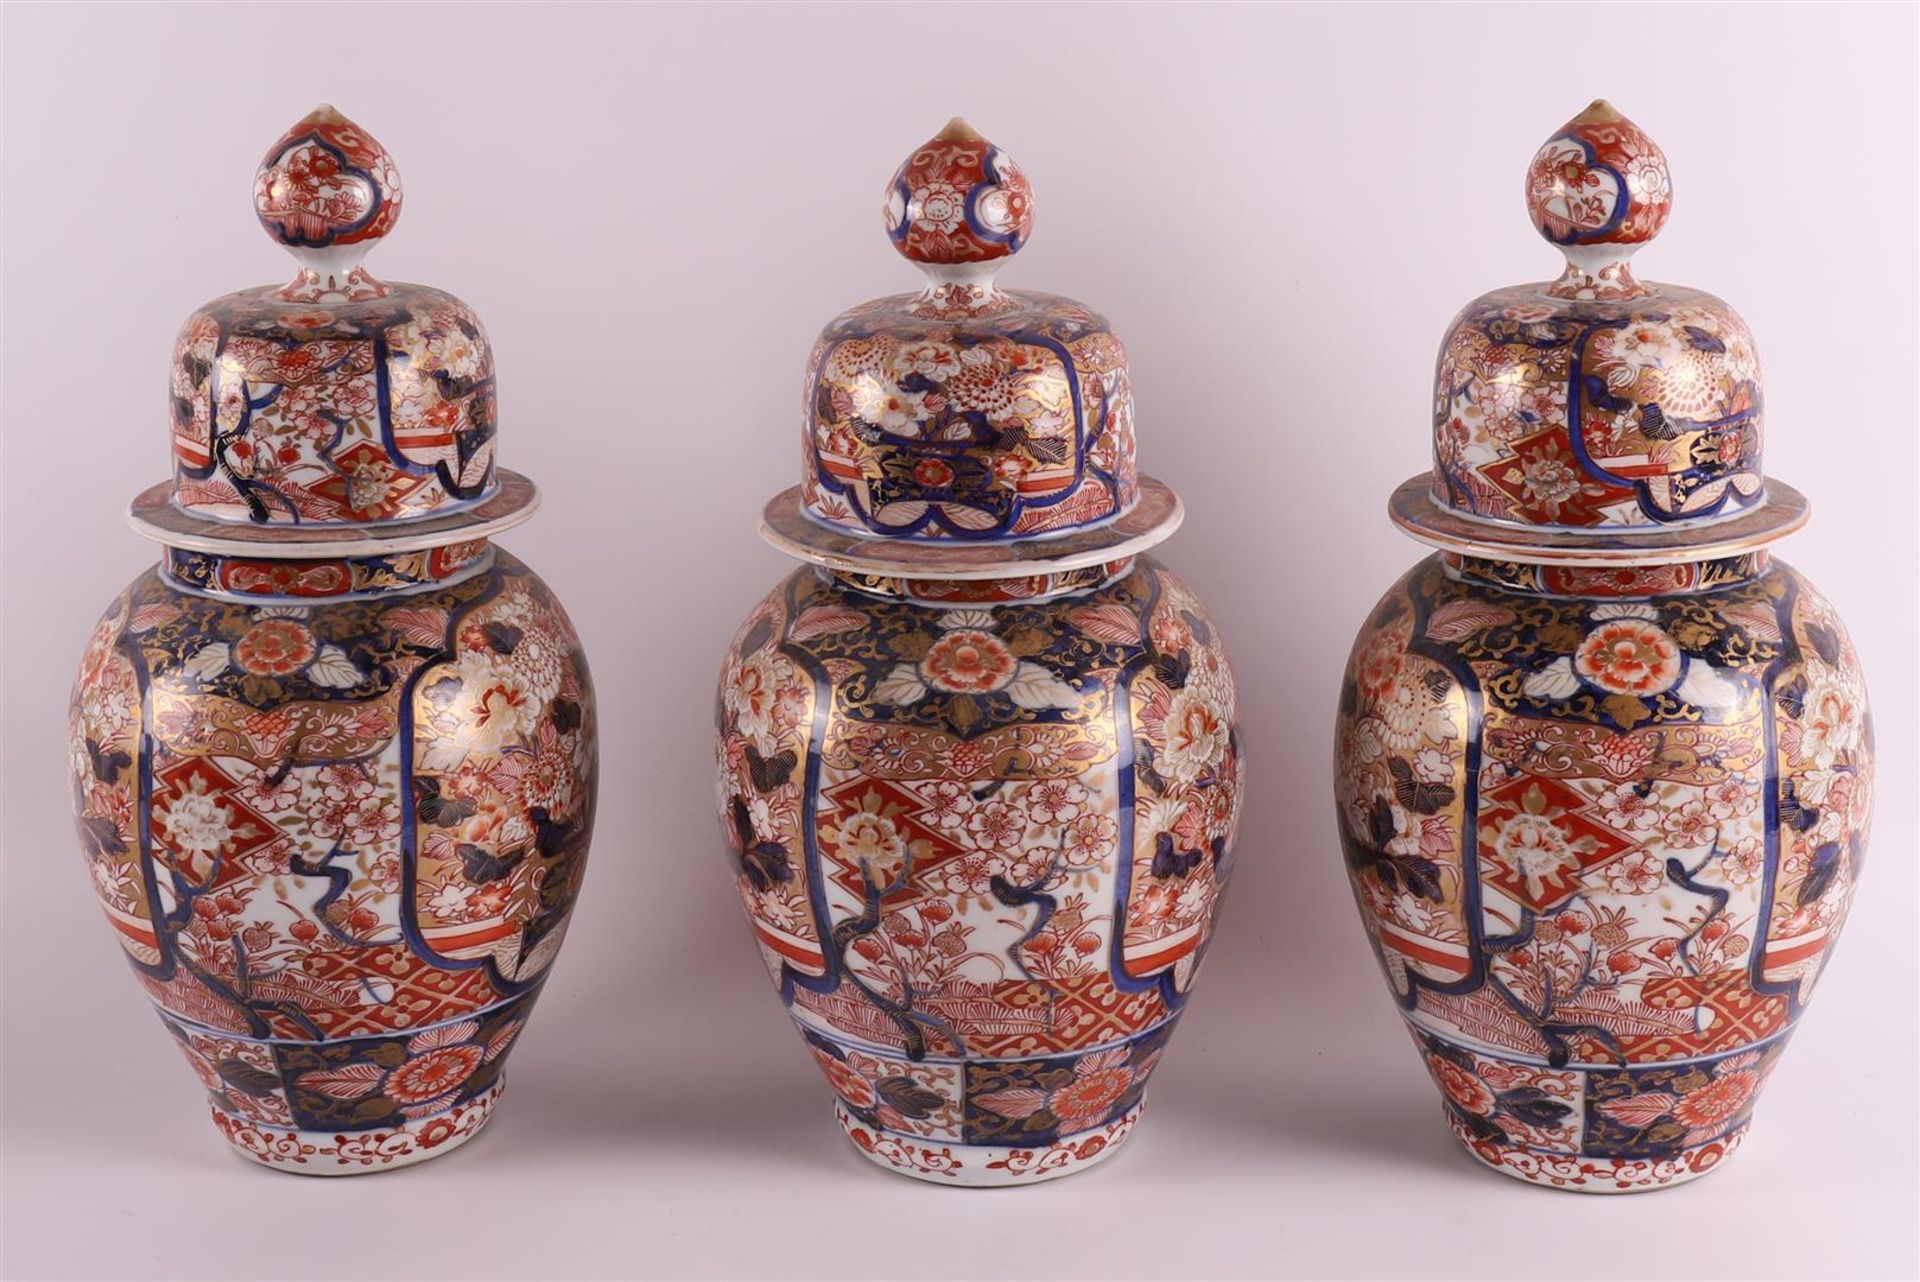 A five-piece porcelain Imari cabinet set, consisting of: three lidded vases and two vases with - Image 6 of 17